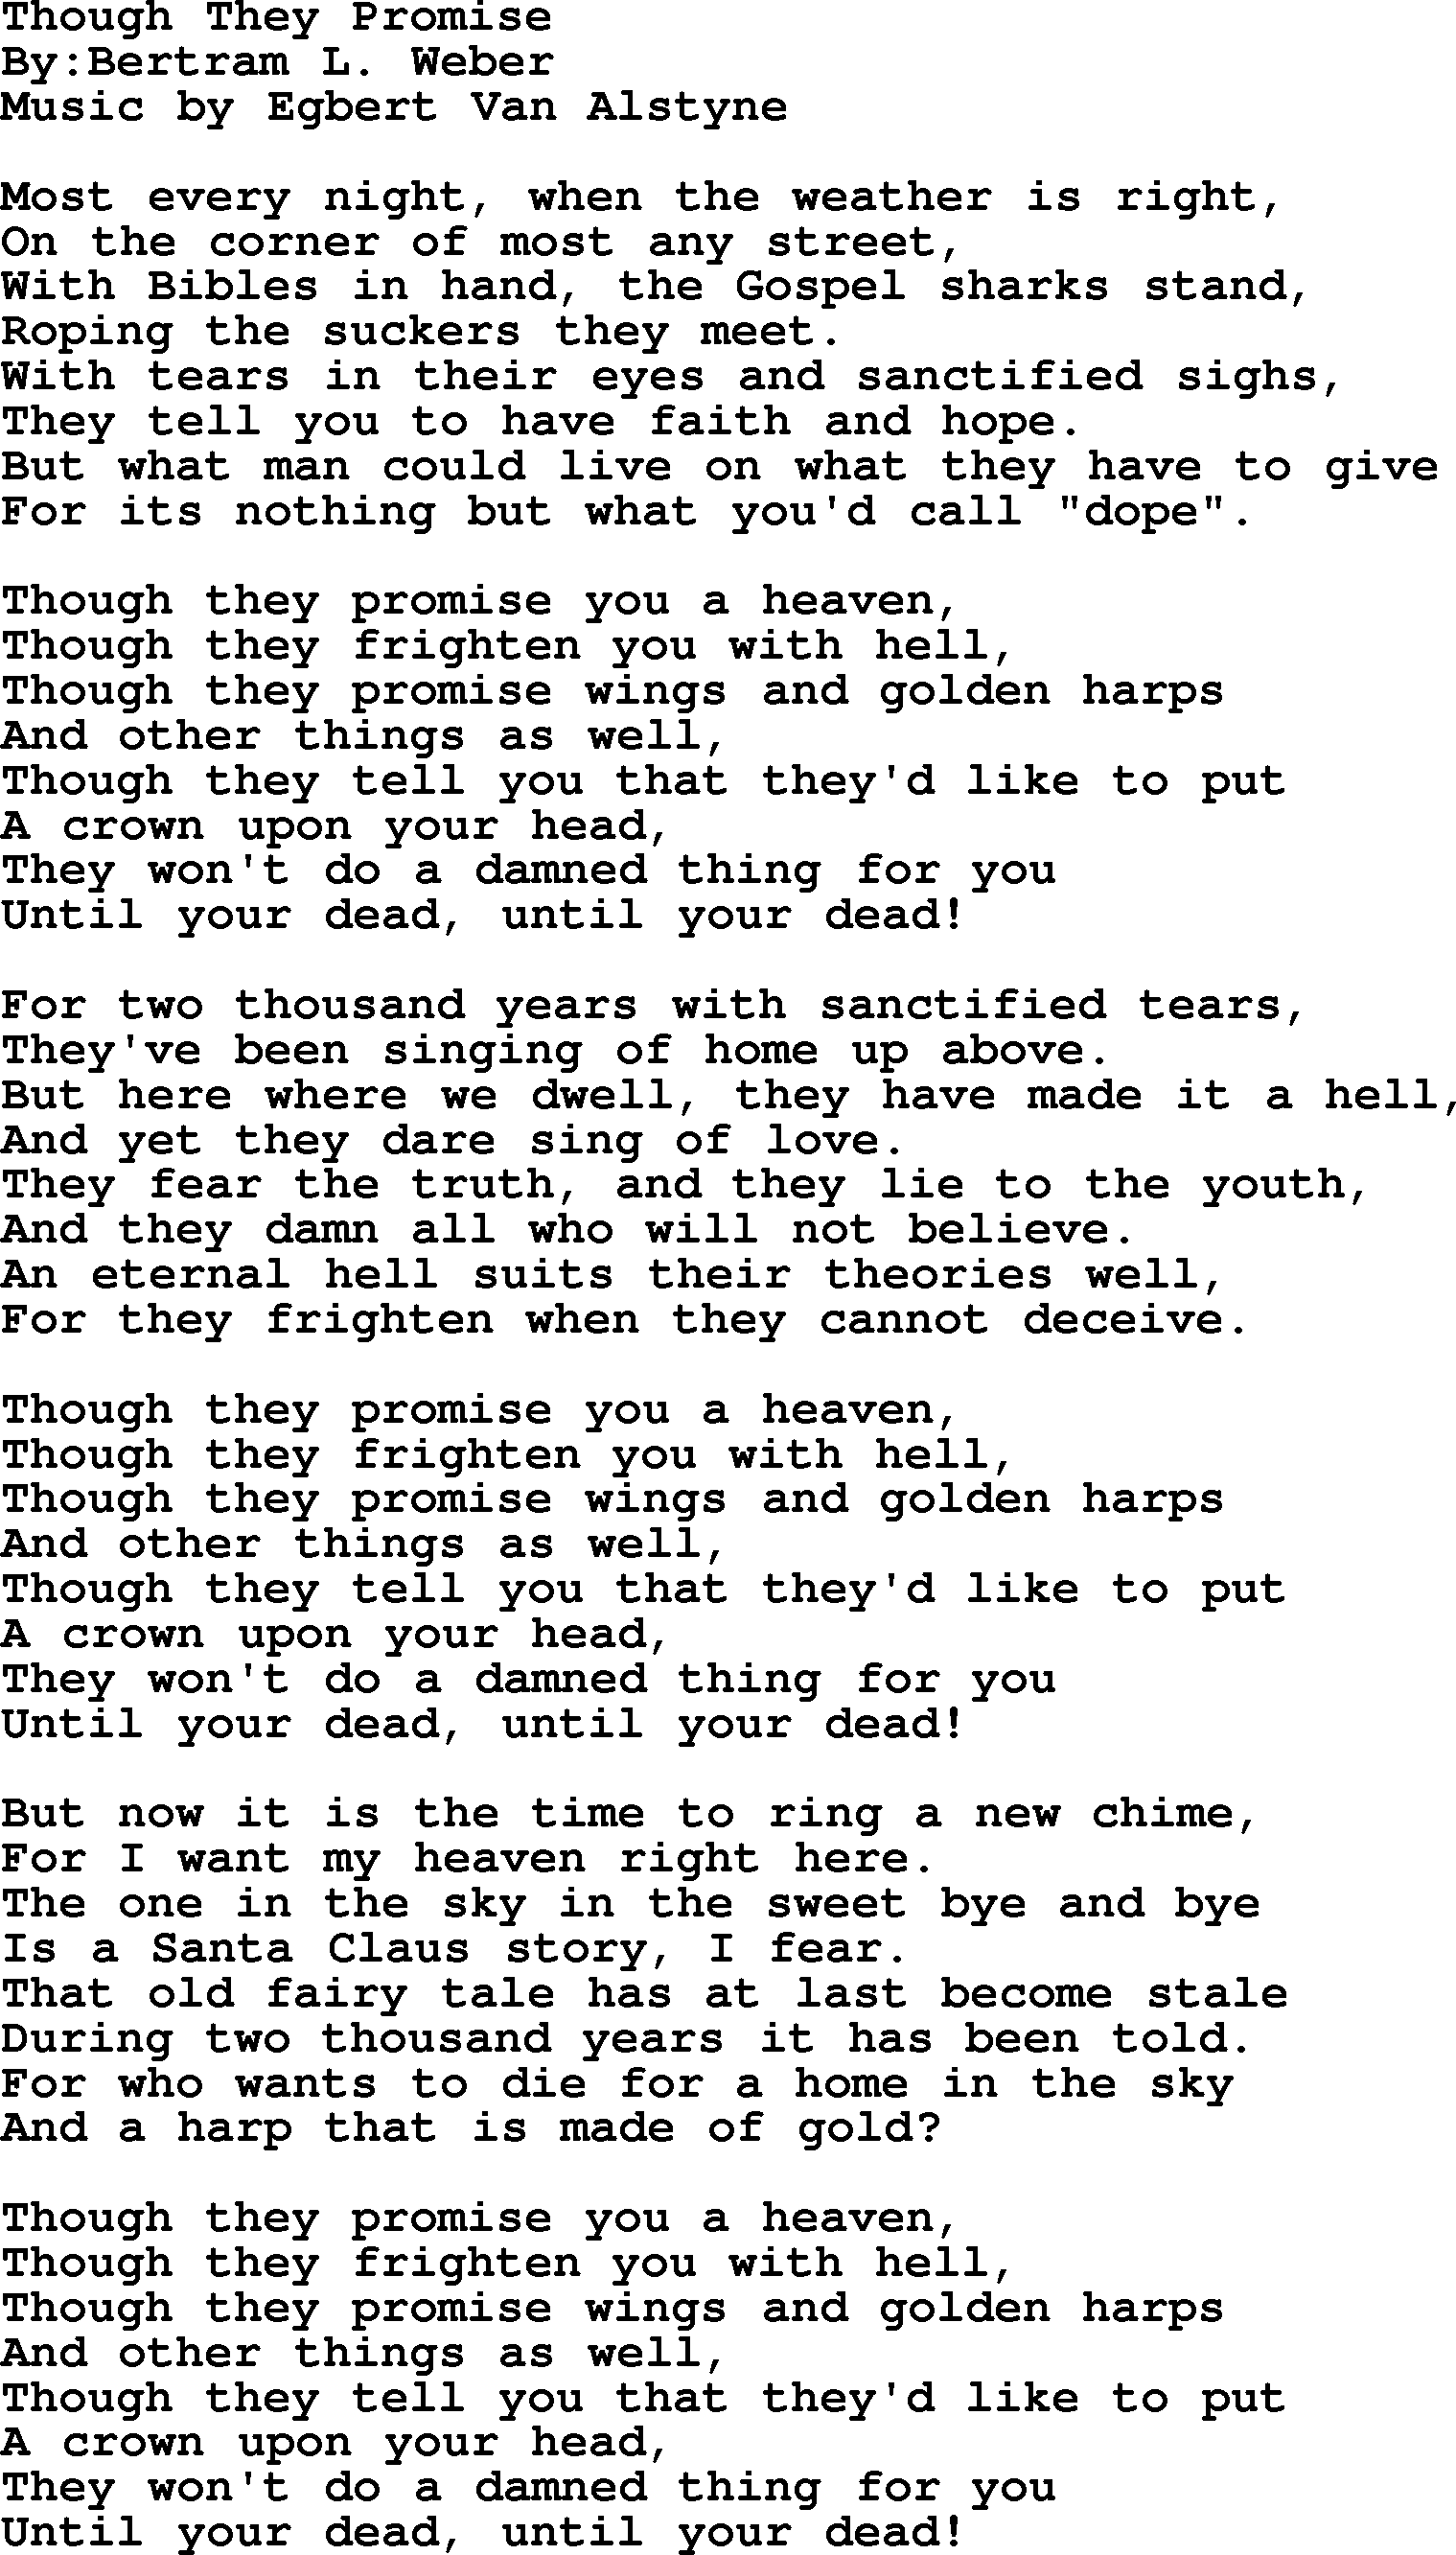 Political, Solidarity, Workers or Union song: Though They Promise, lyrics